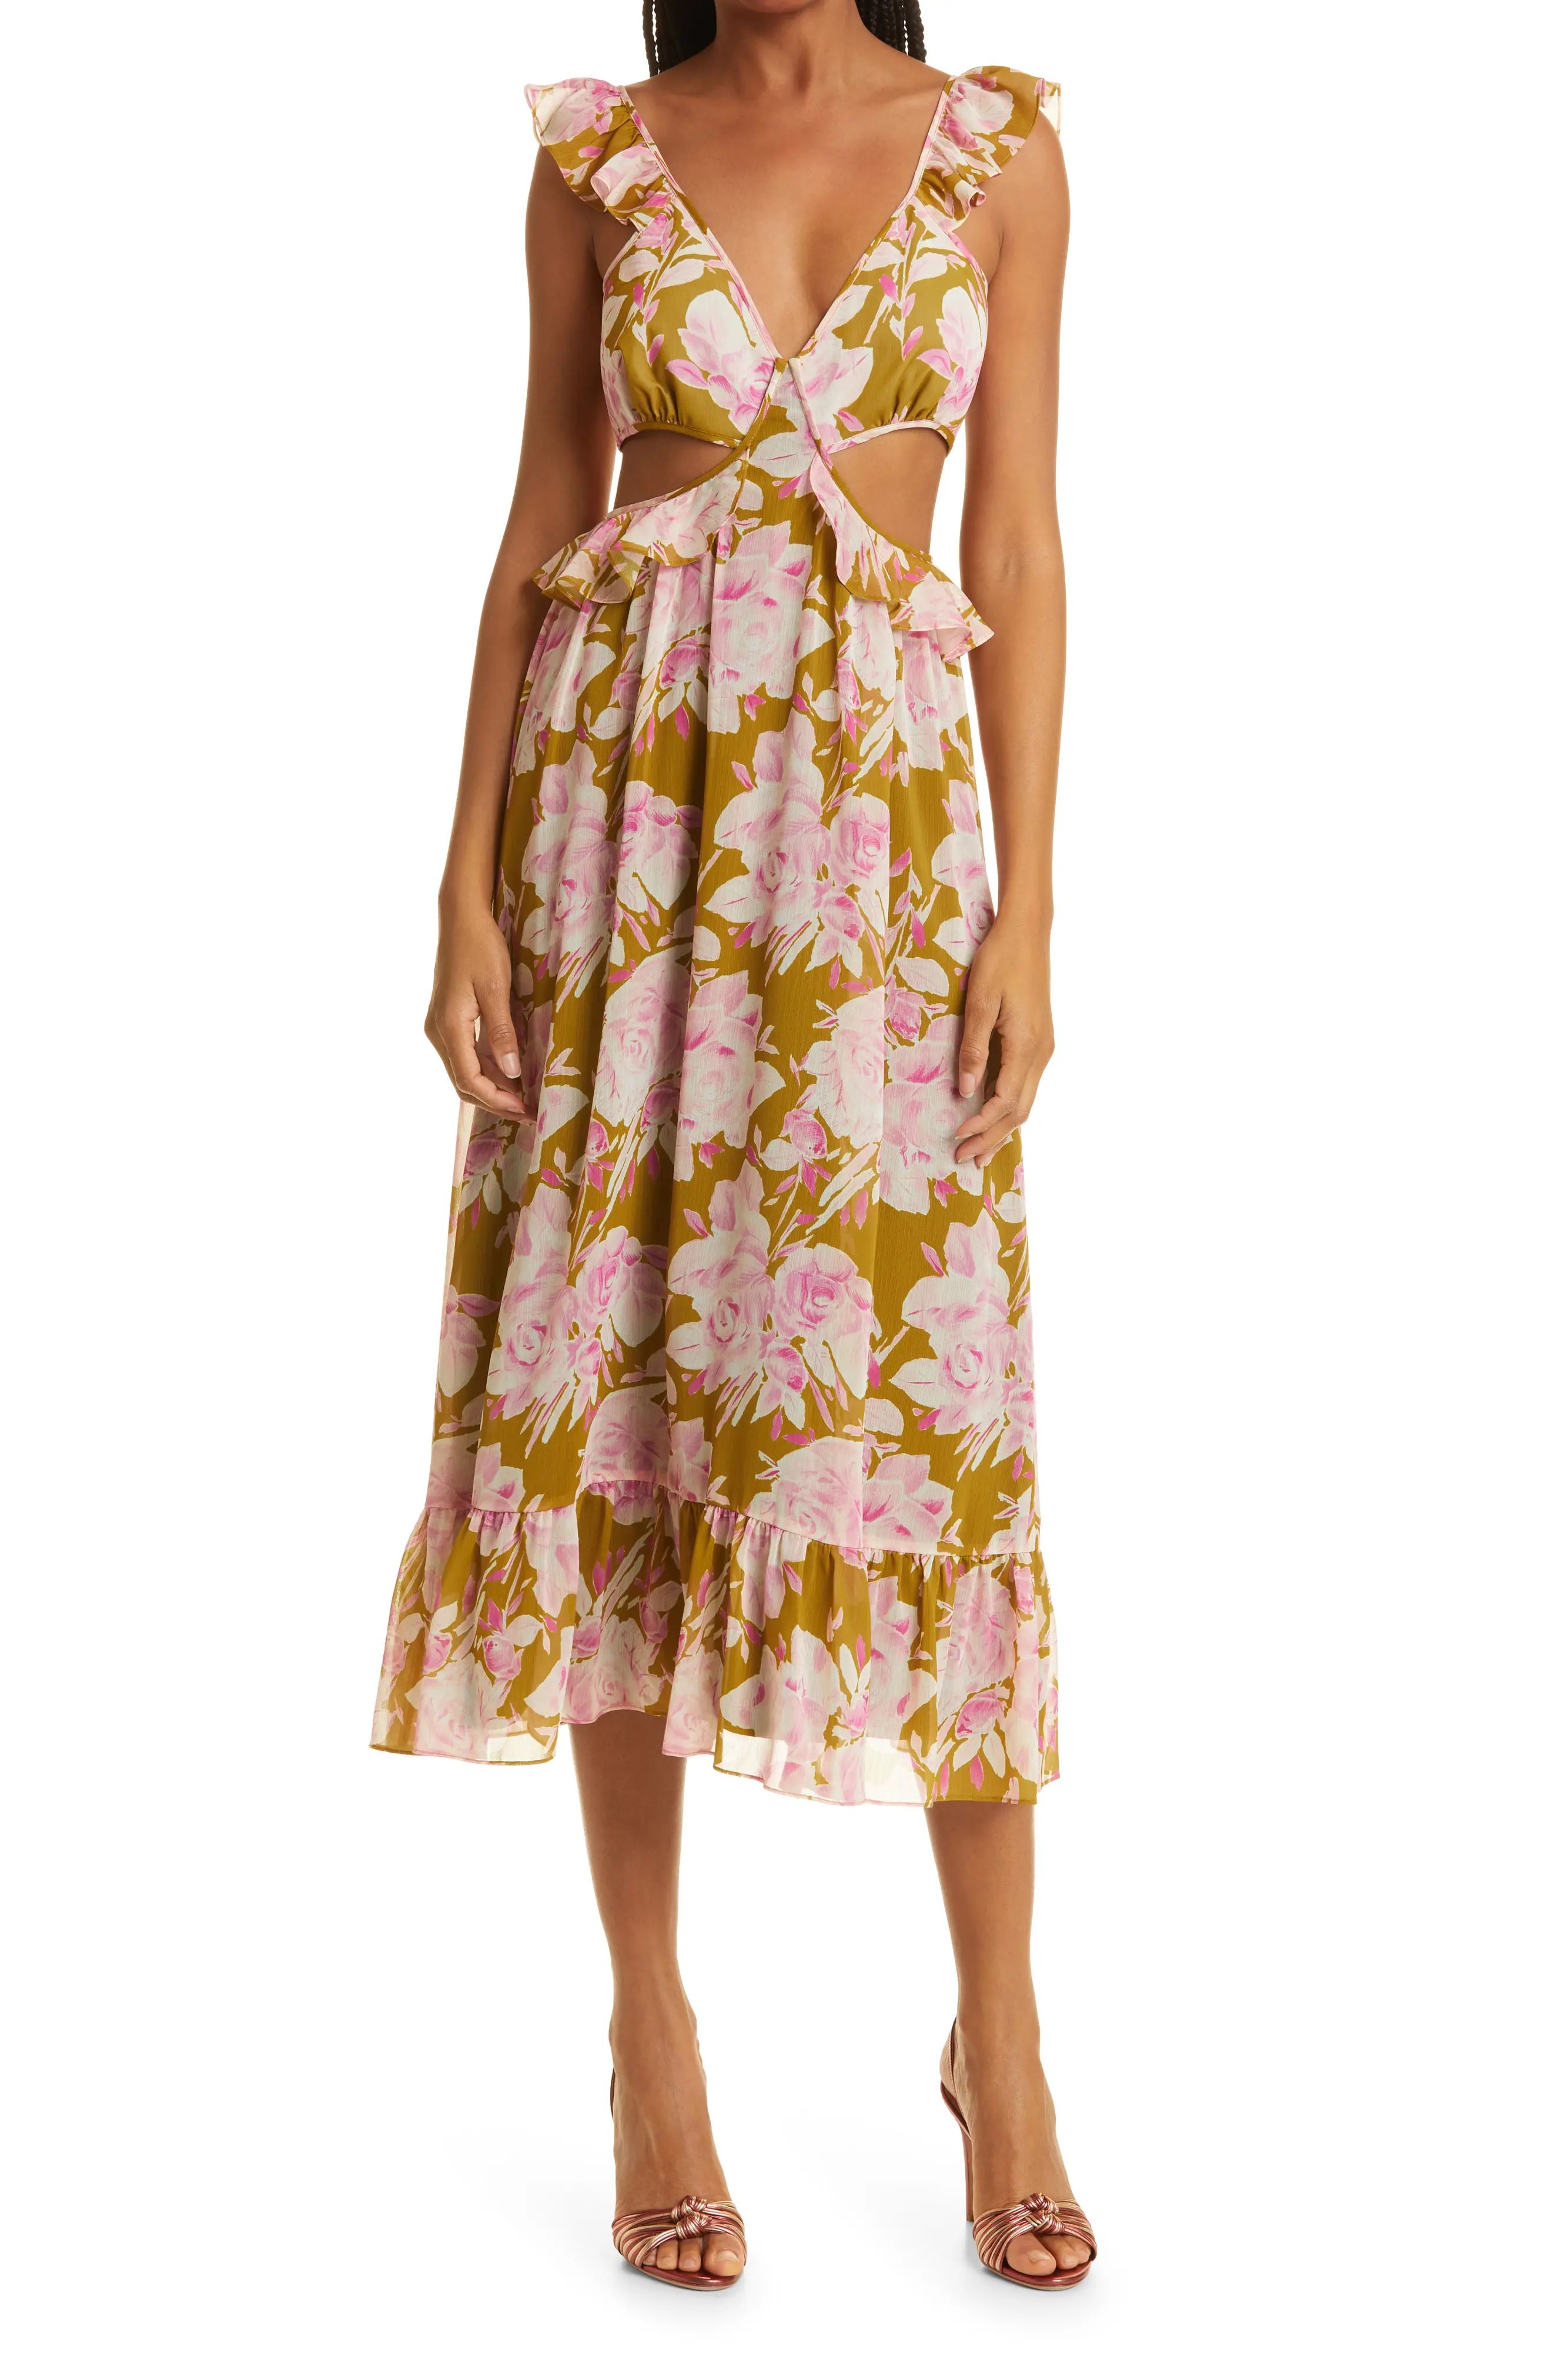 LIKELY Katerina Floral Cutout Midi Dress in Olive Oil/Pink at Nordstrom, Size 14 | Nordstrom